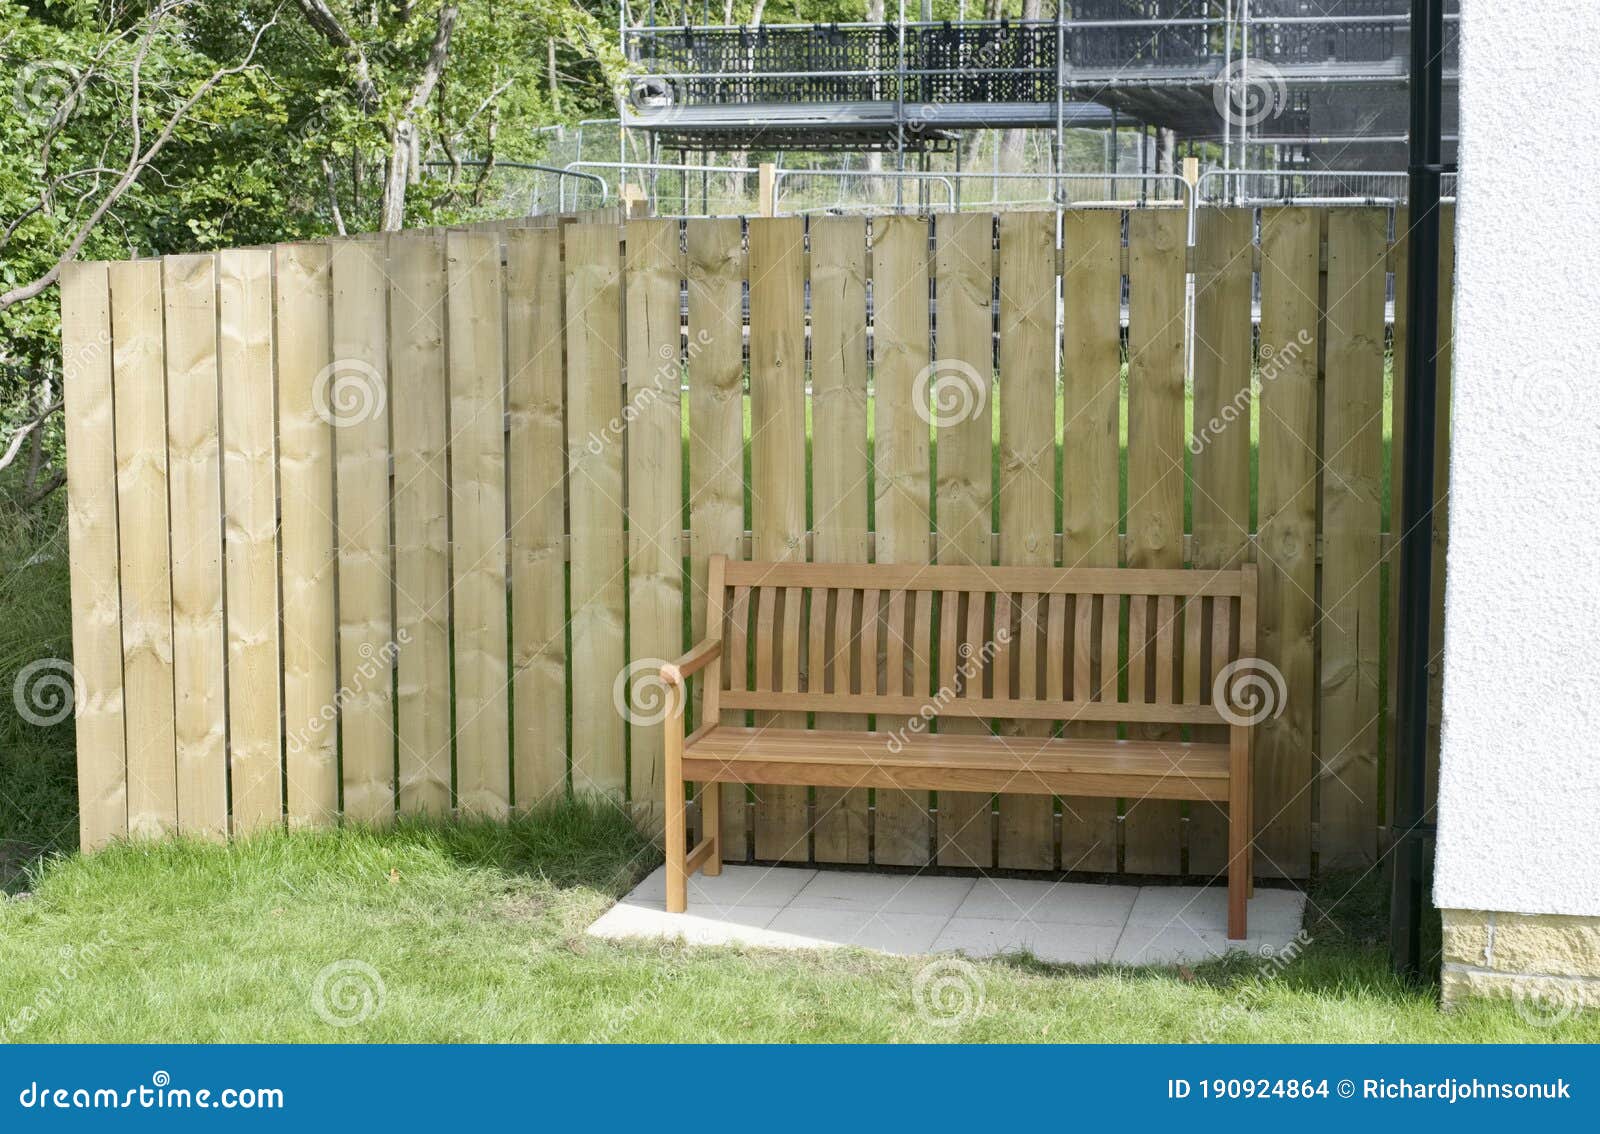 Oak Wooden Garden Seat Bench On House Lawn Stock Photo Image Of Clean Plant 190924864